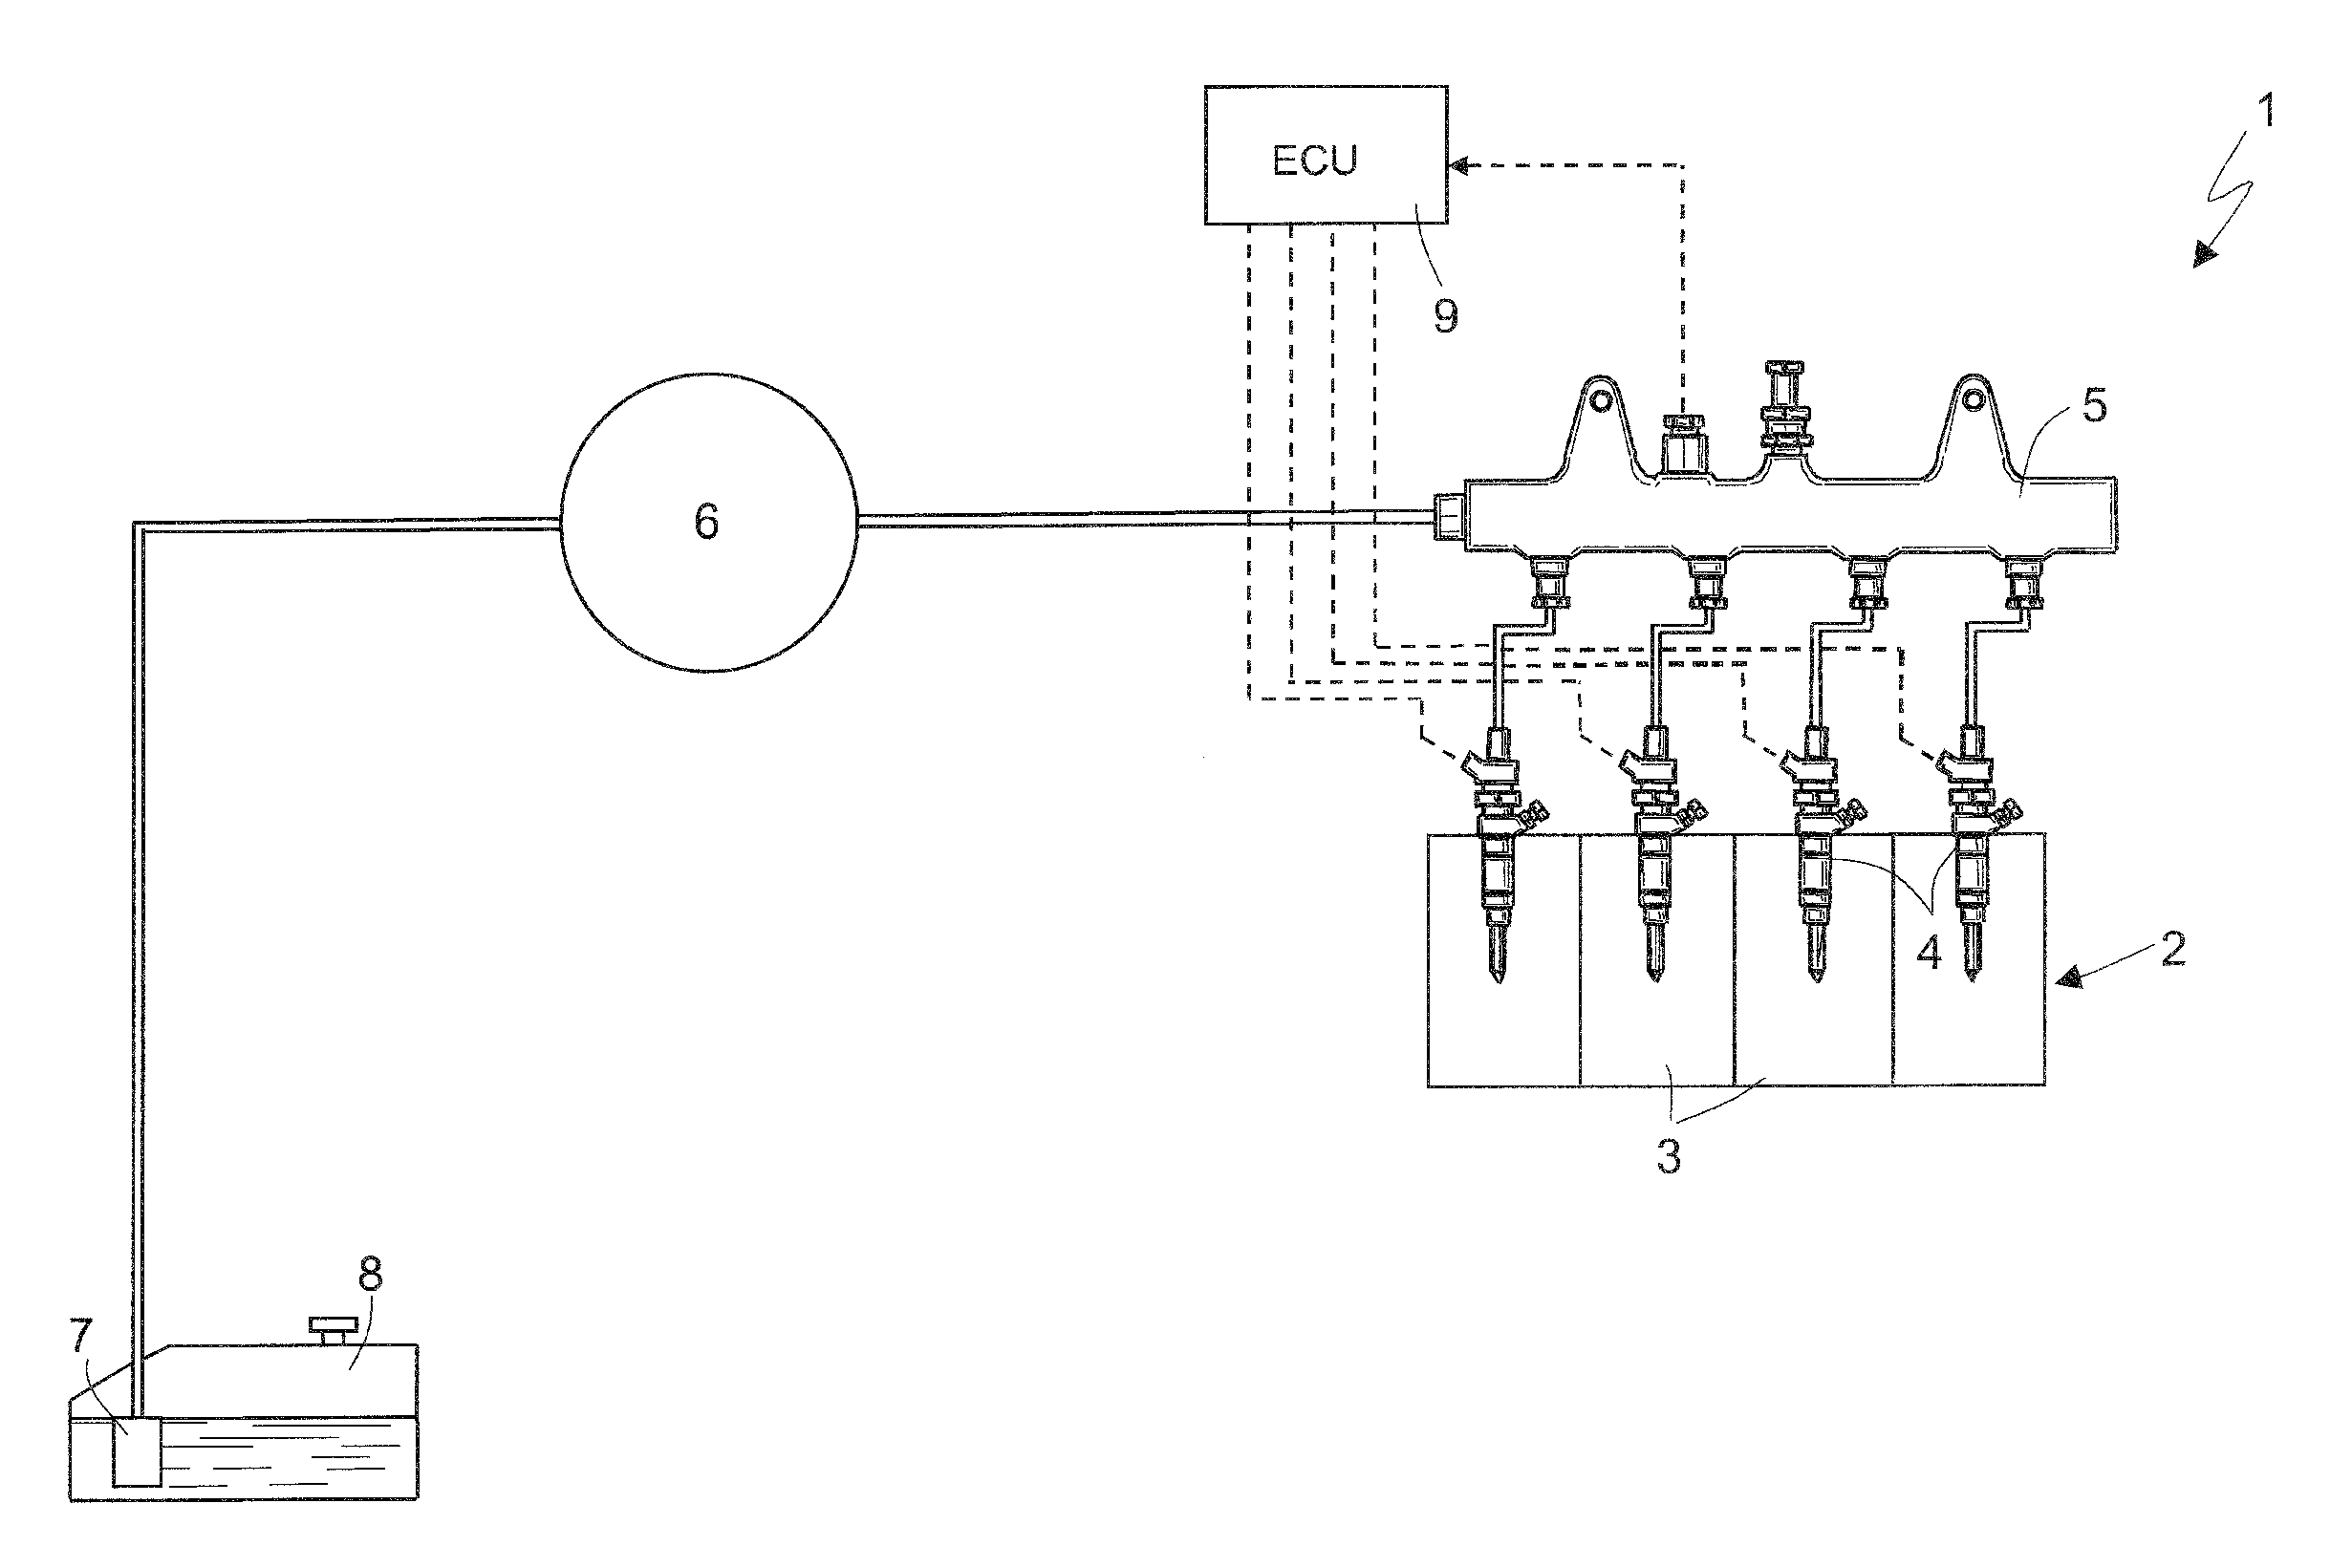 Method of controlling an electromagnetic fuel injector